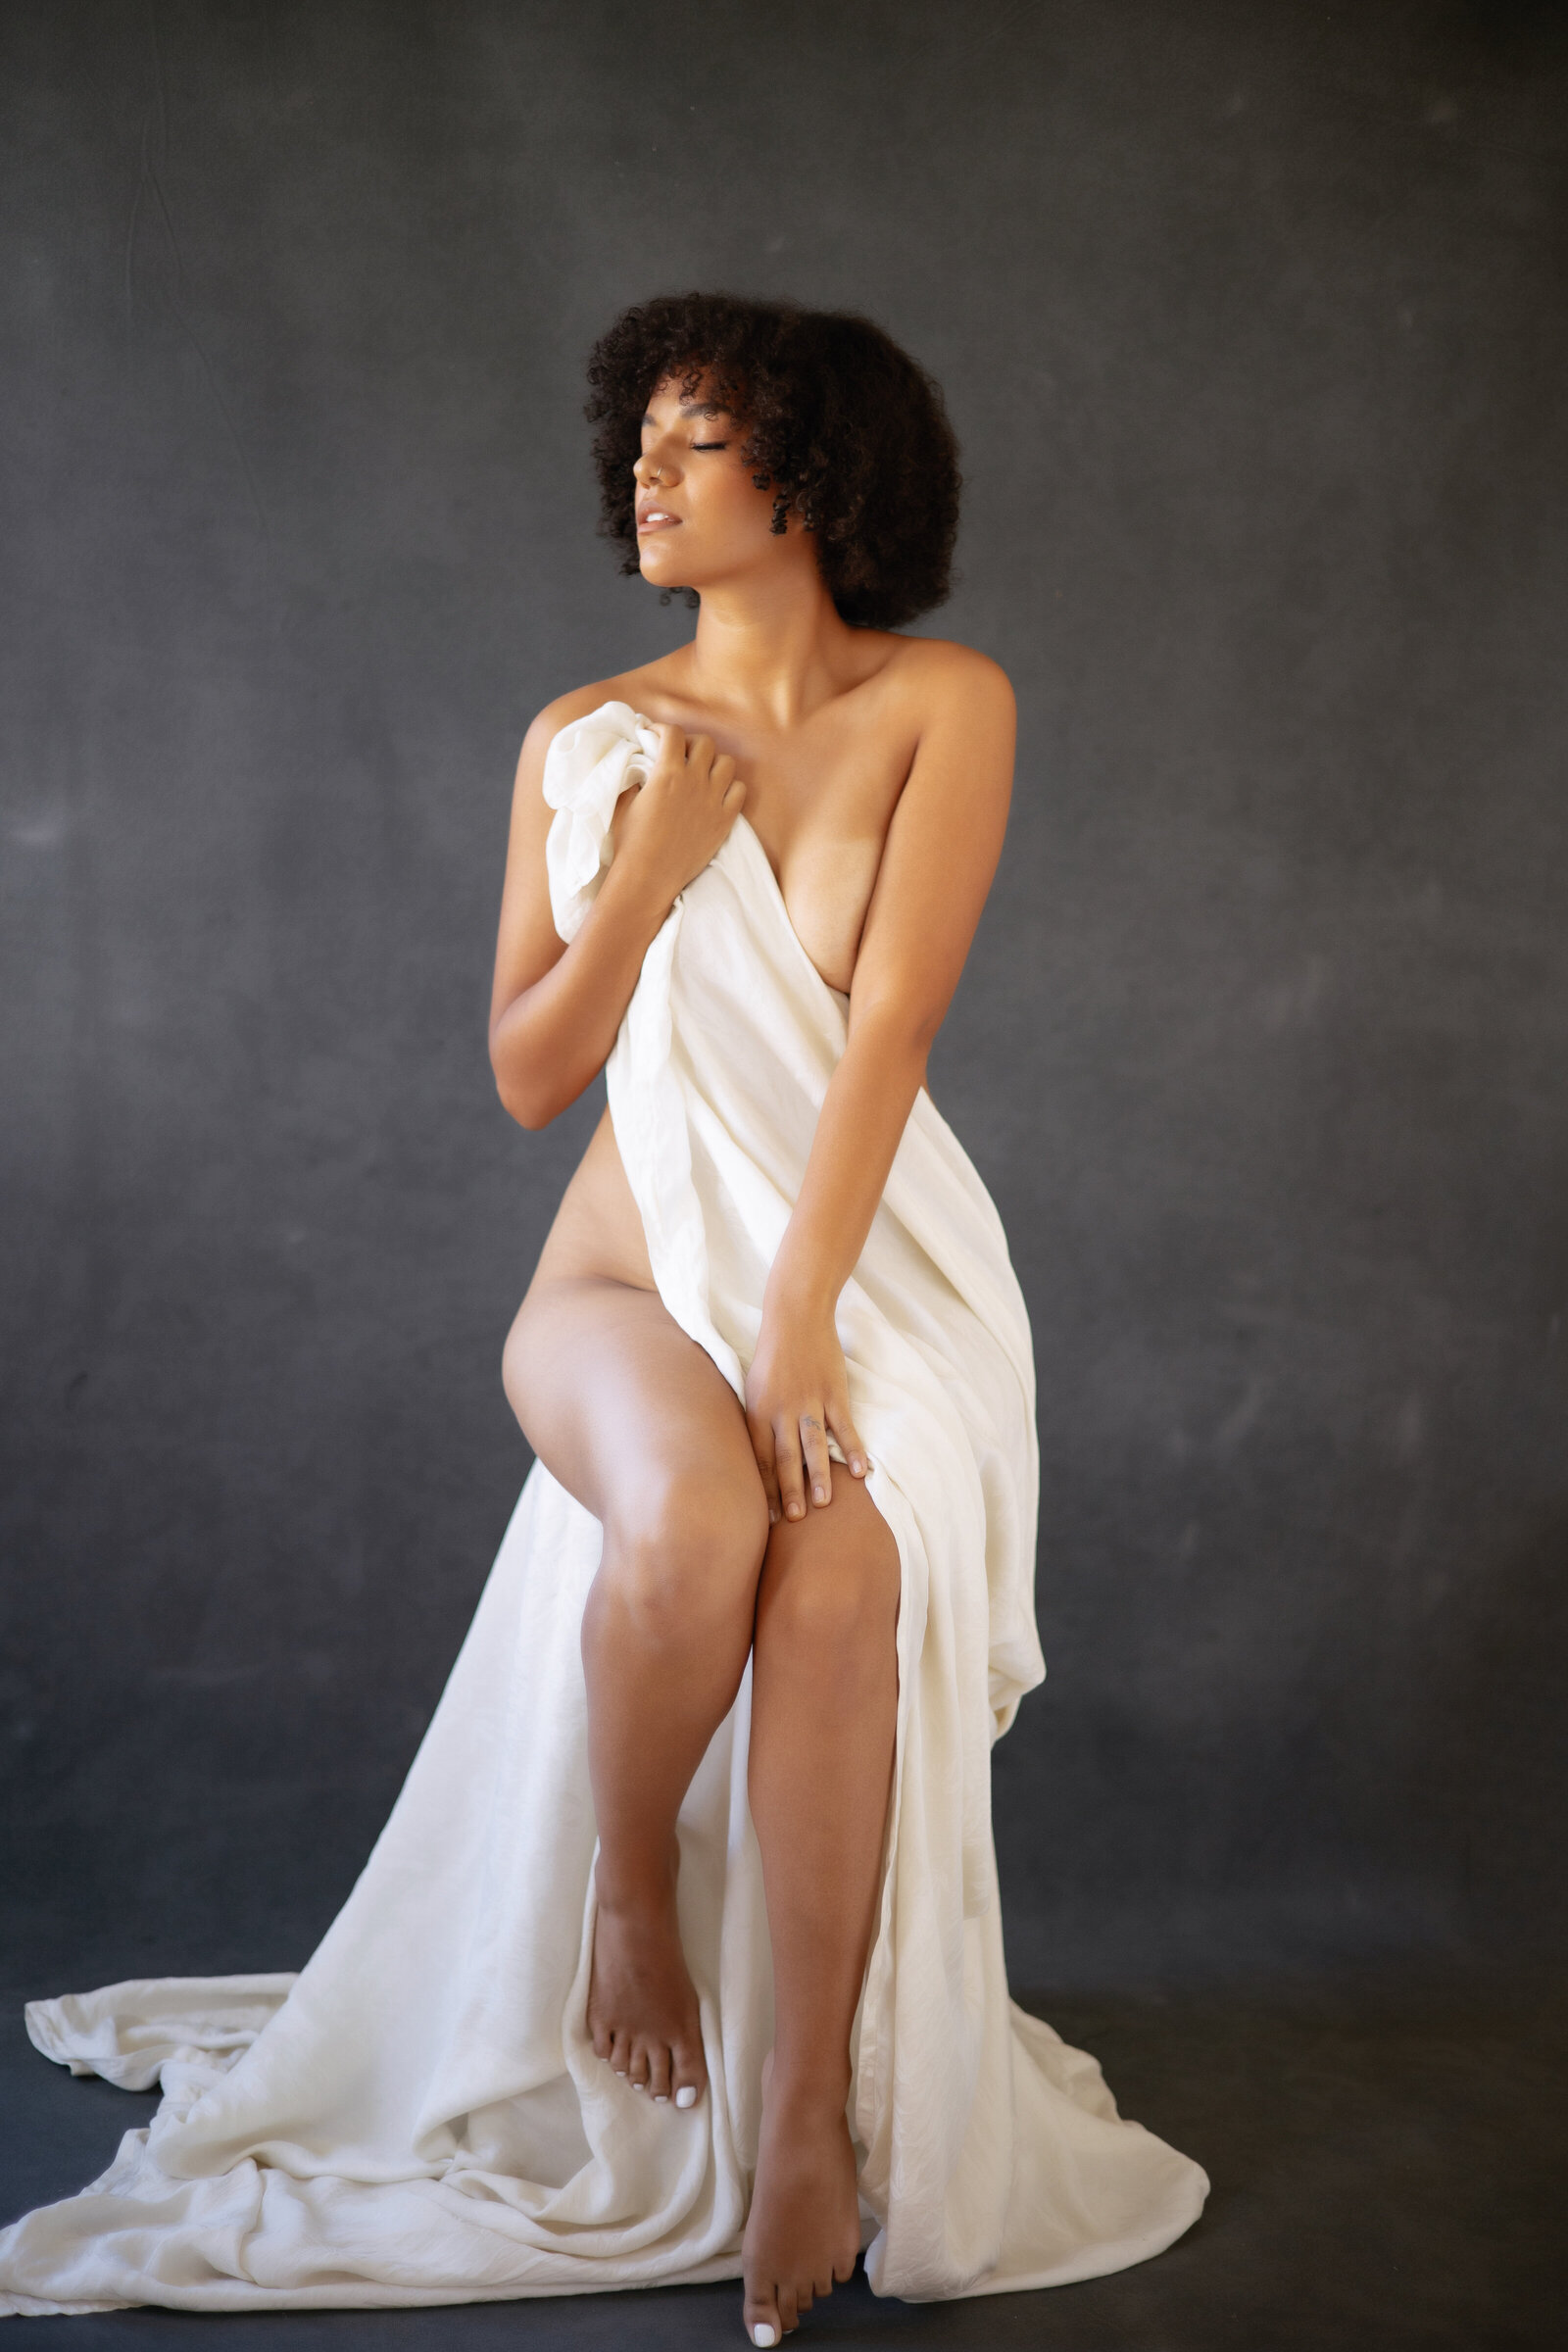 Black woman wrapped in white sheet